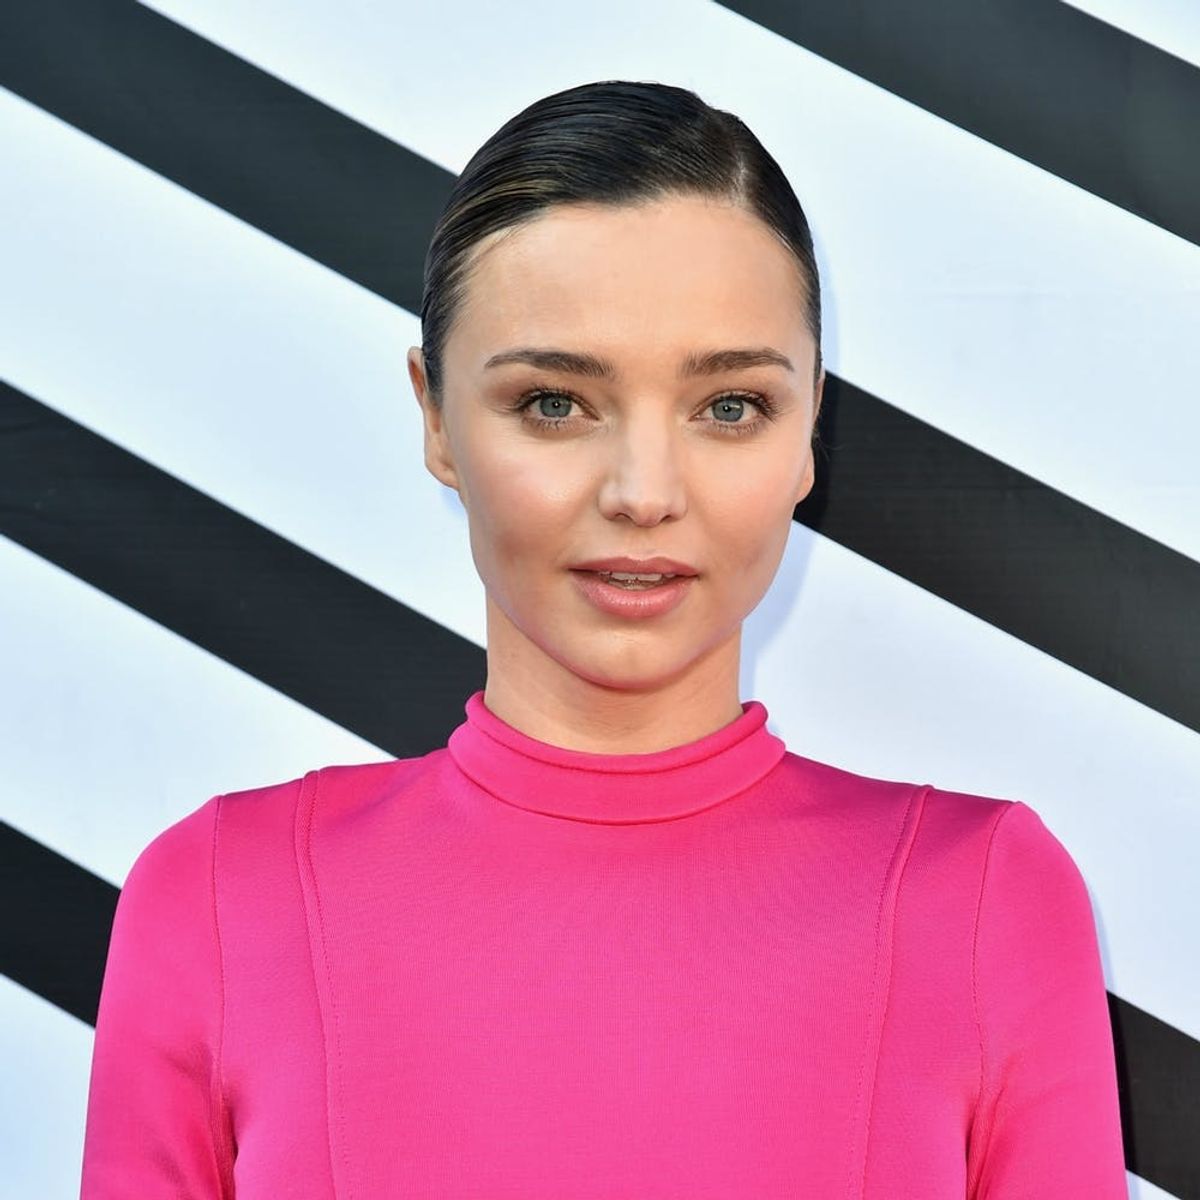 This Is the Scary Sitch That Put Miranda Kerr’s Security Guard in the ER